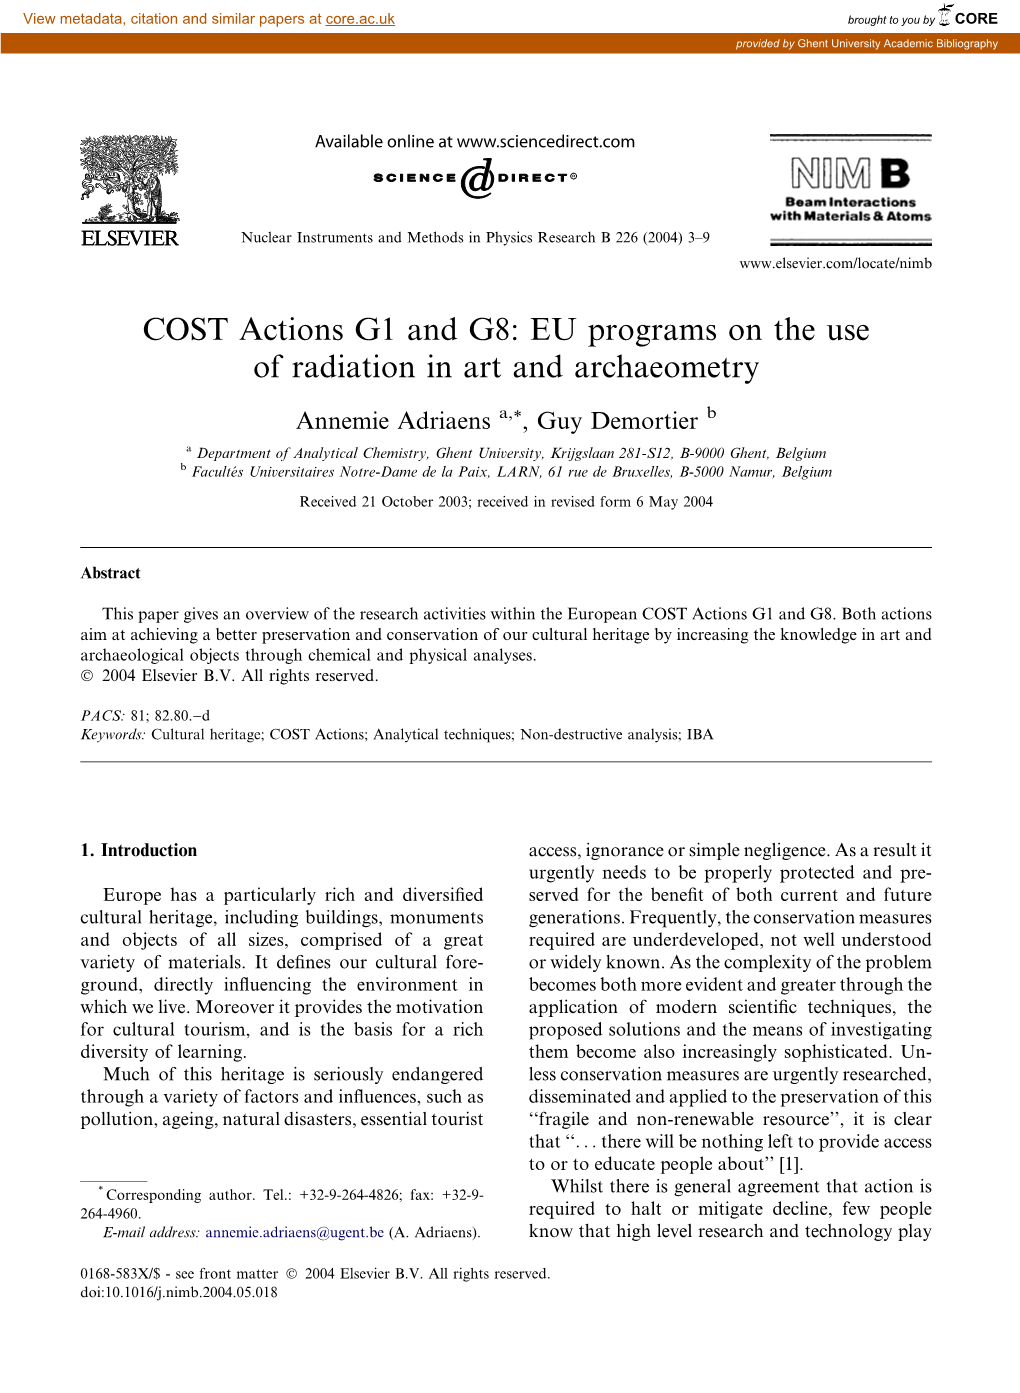 COST Actions G1 and G8: EU Programs on the Use of Radiation in Art and Archaeometry